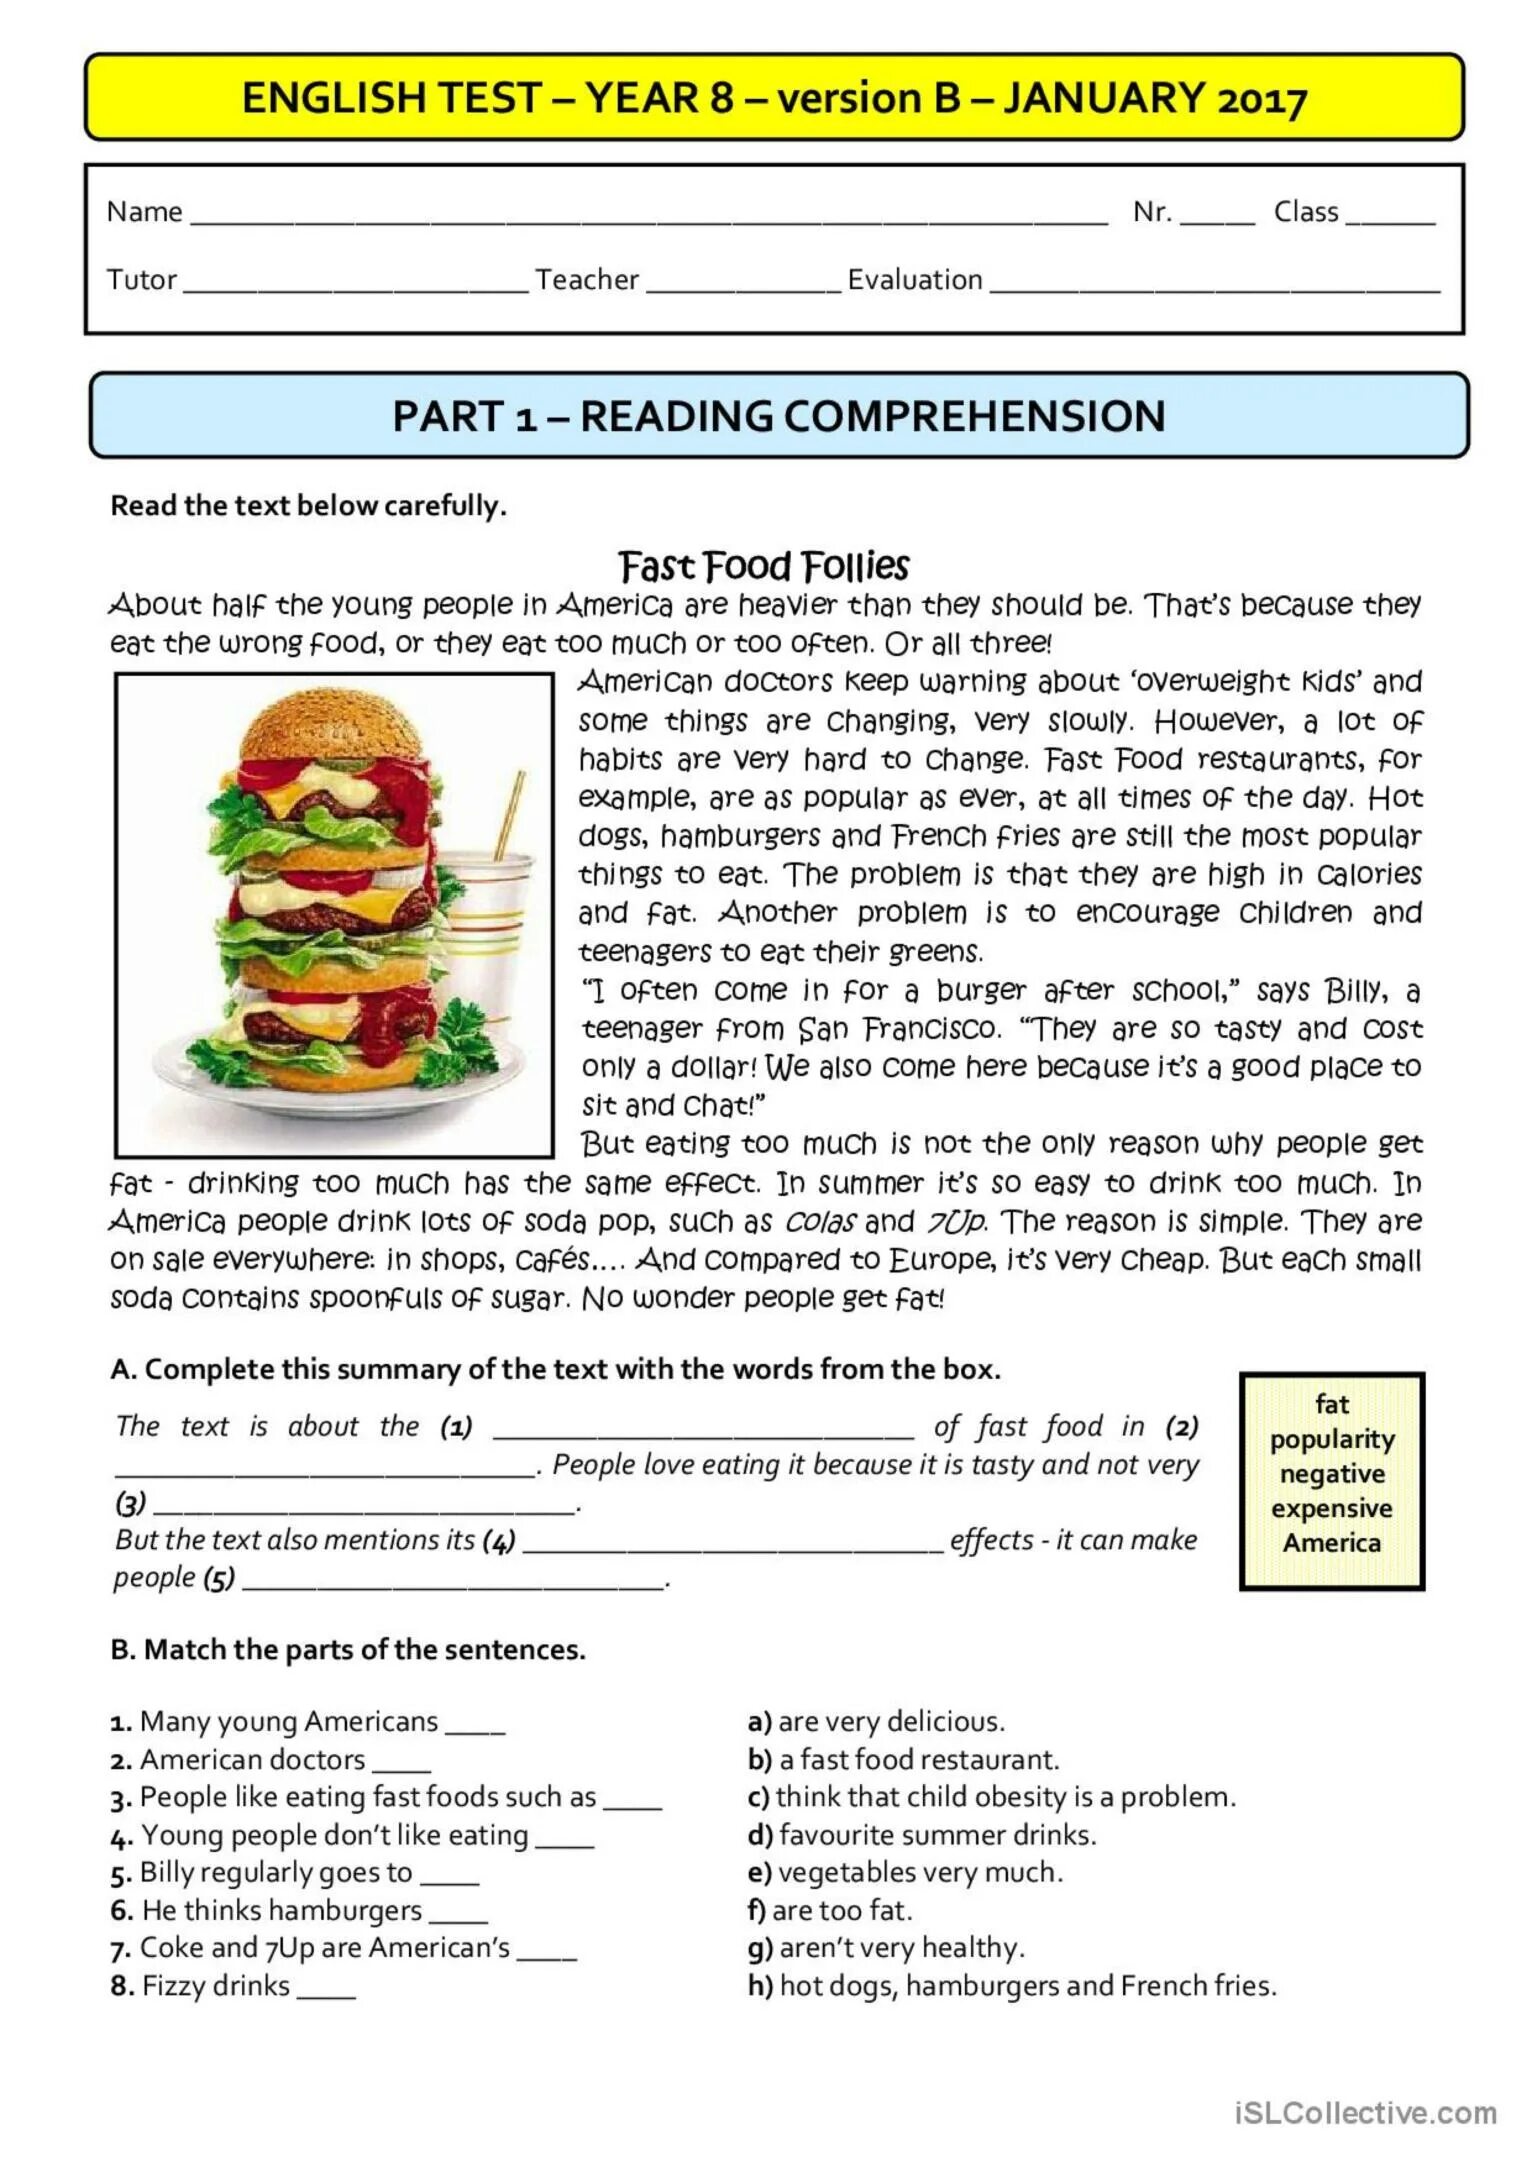 Reading Comprehension английский. Фаст фуд на английском. Reading Comprehension тесты. Food reading Comprehension. Reading about food